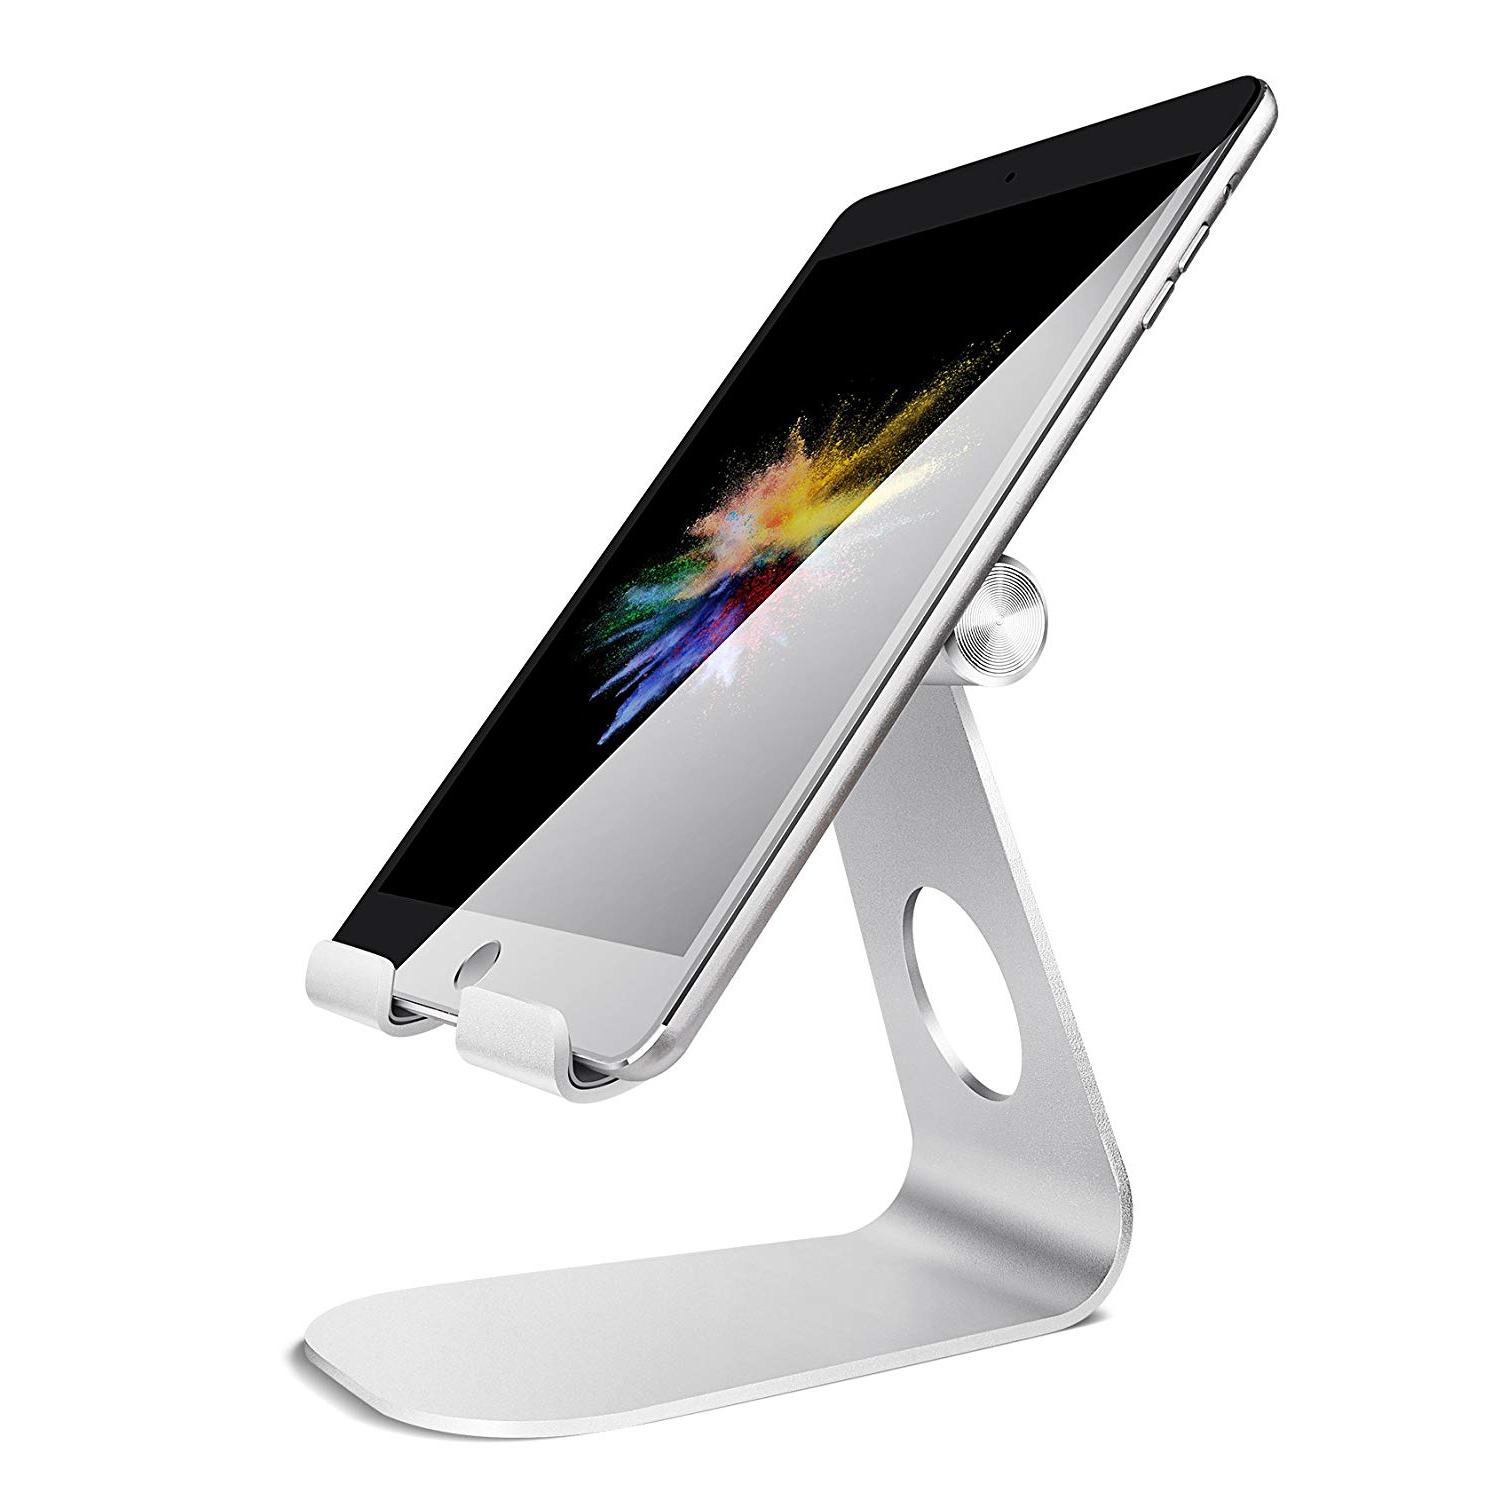 Lamicall - Most compatible iPad stand